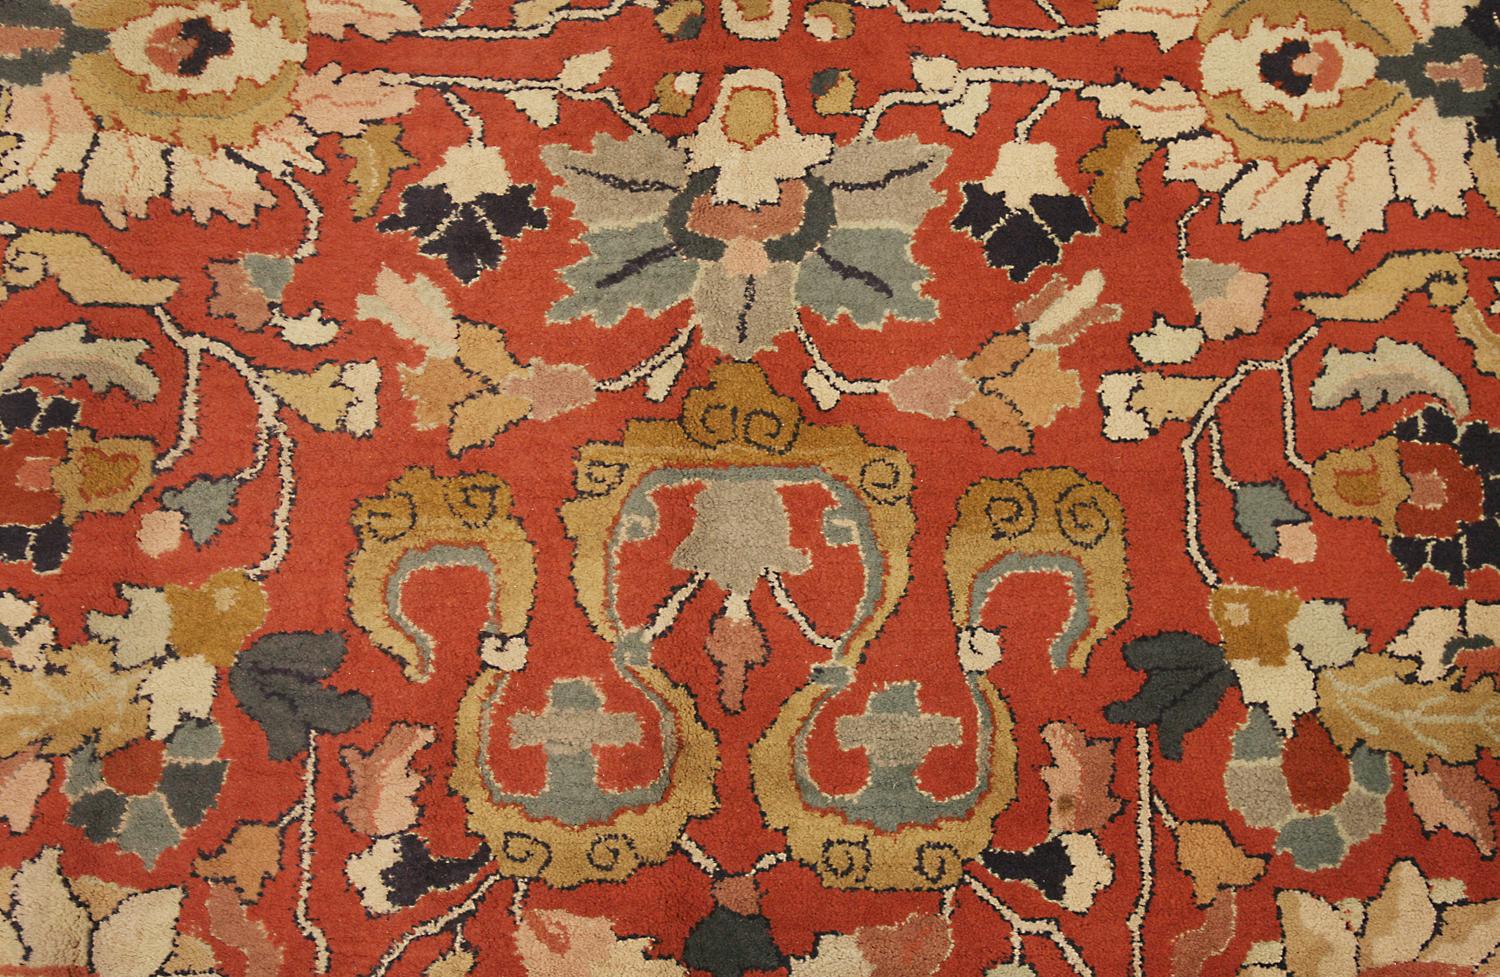 Hand-Knotted Floral All-Over Field Massive Antique German Rust Tetex Carpet, ca. 1920 For Sale